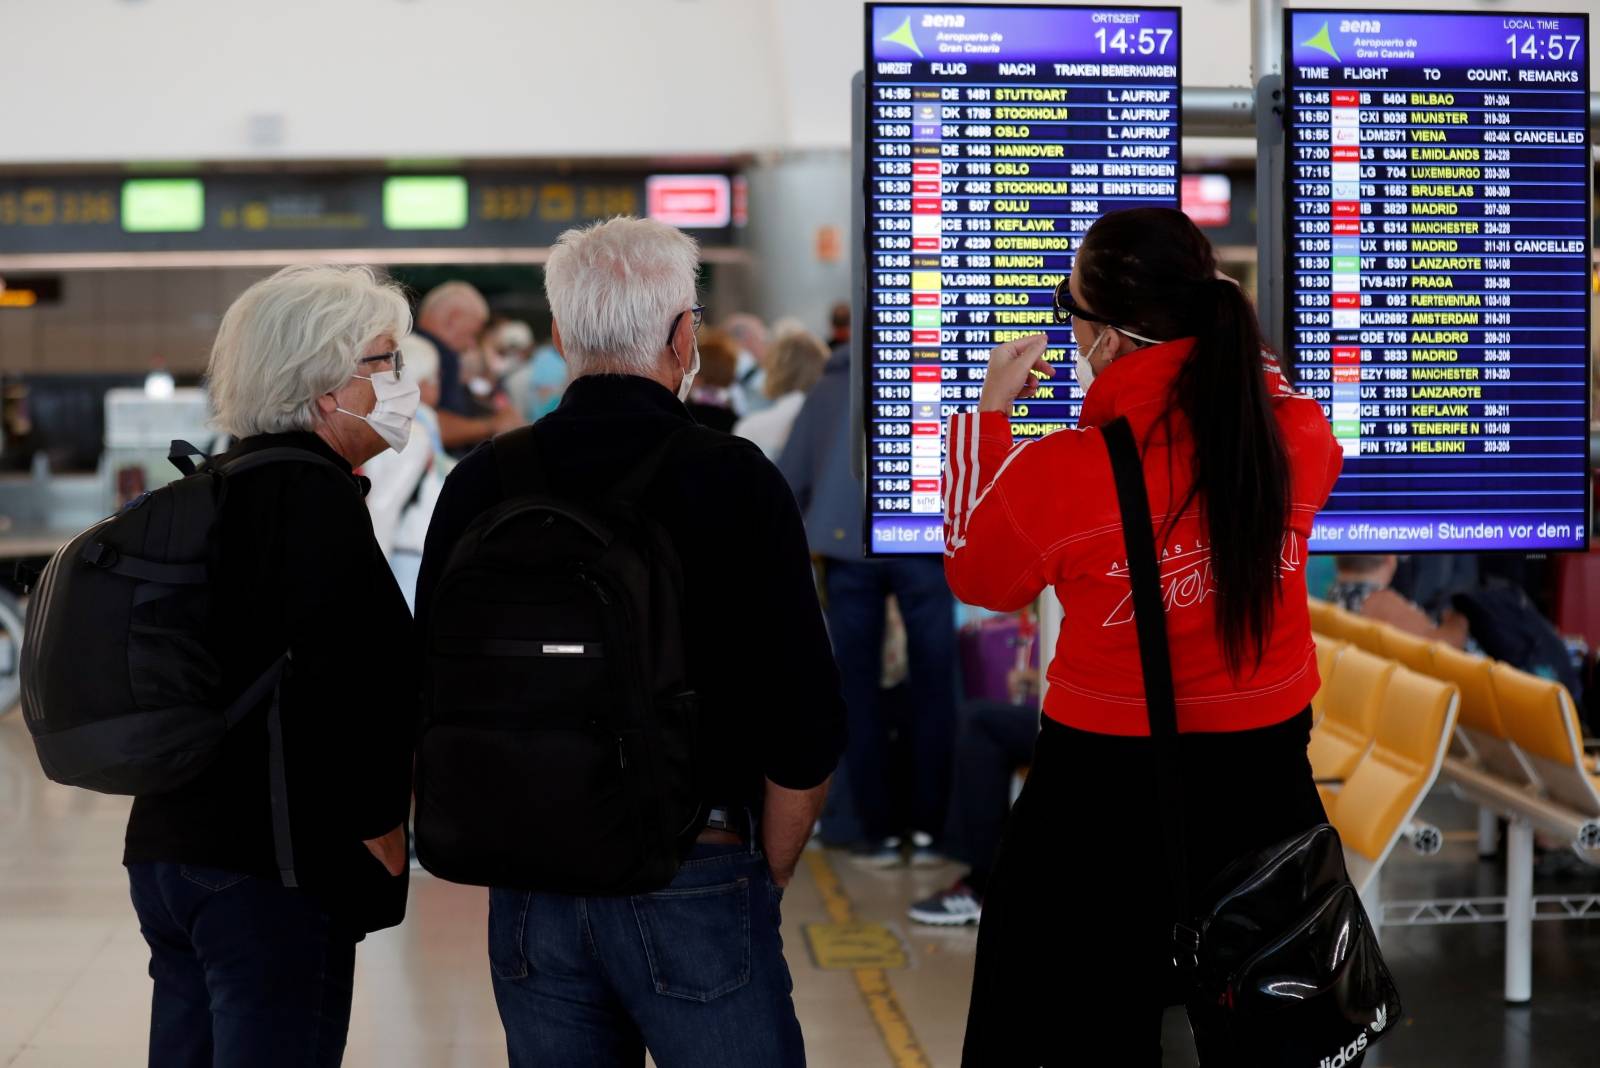 Tourists at Gran Canaria airport return to their countries after closure of hotels during health emergency of coronavirus disease (COVID-19)